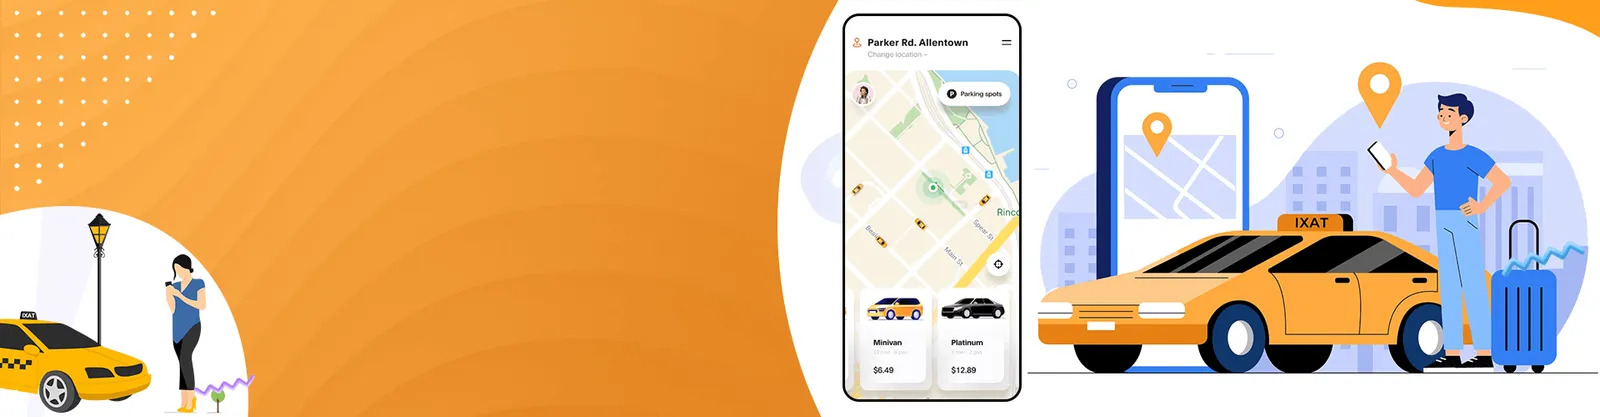 10 Best Taxi Apps for Ride -Hailing Business (Android & iOS)